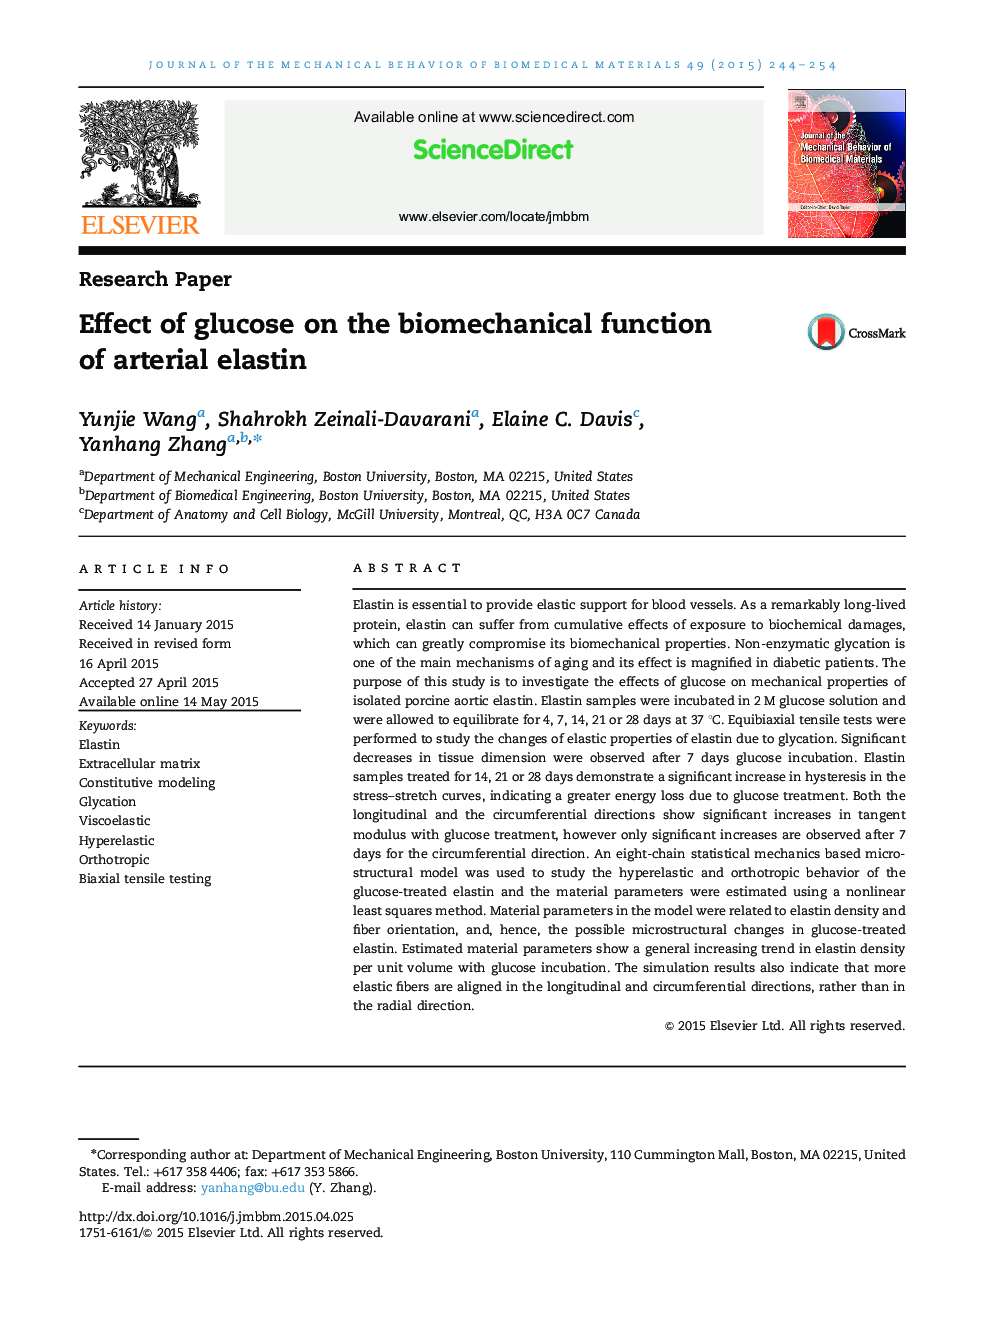 Effect of glucose on the biomechanical function of arterial elastin